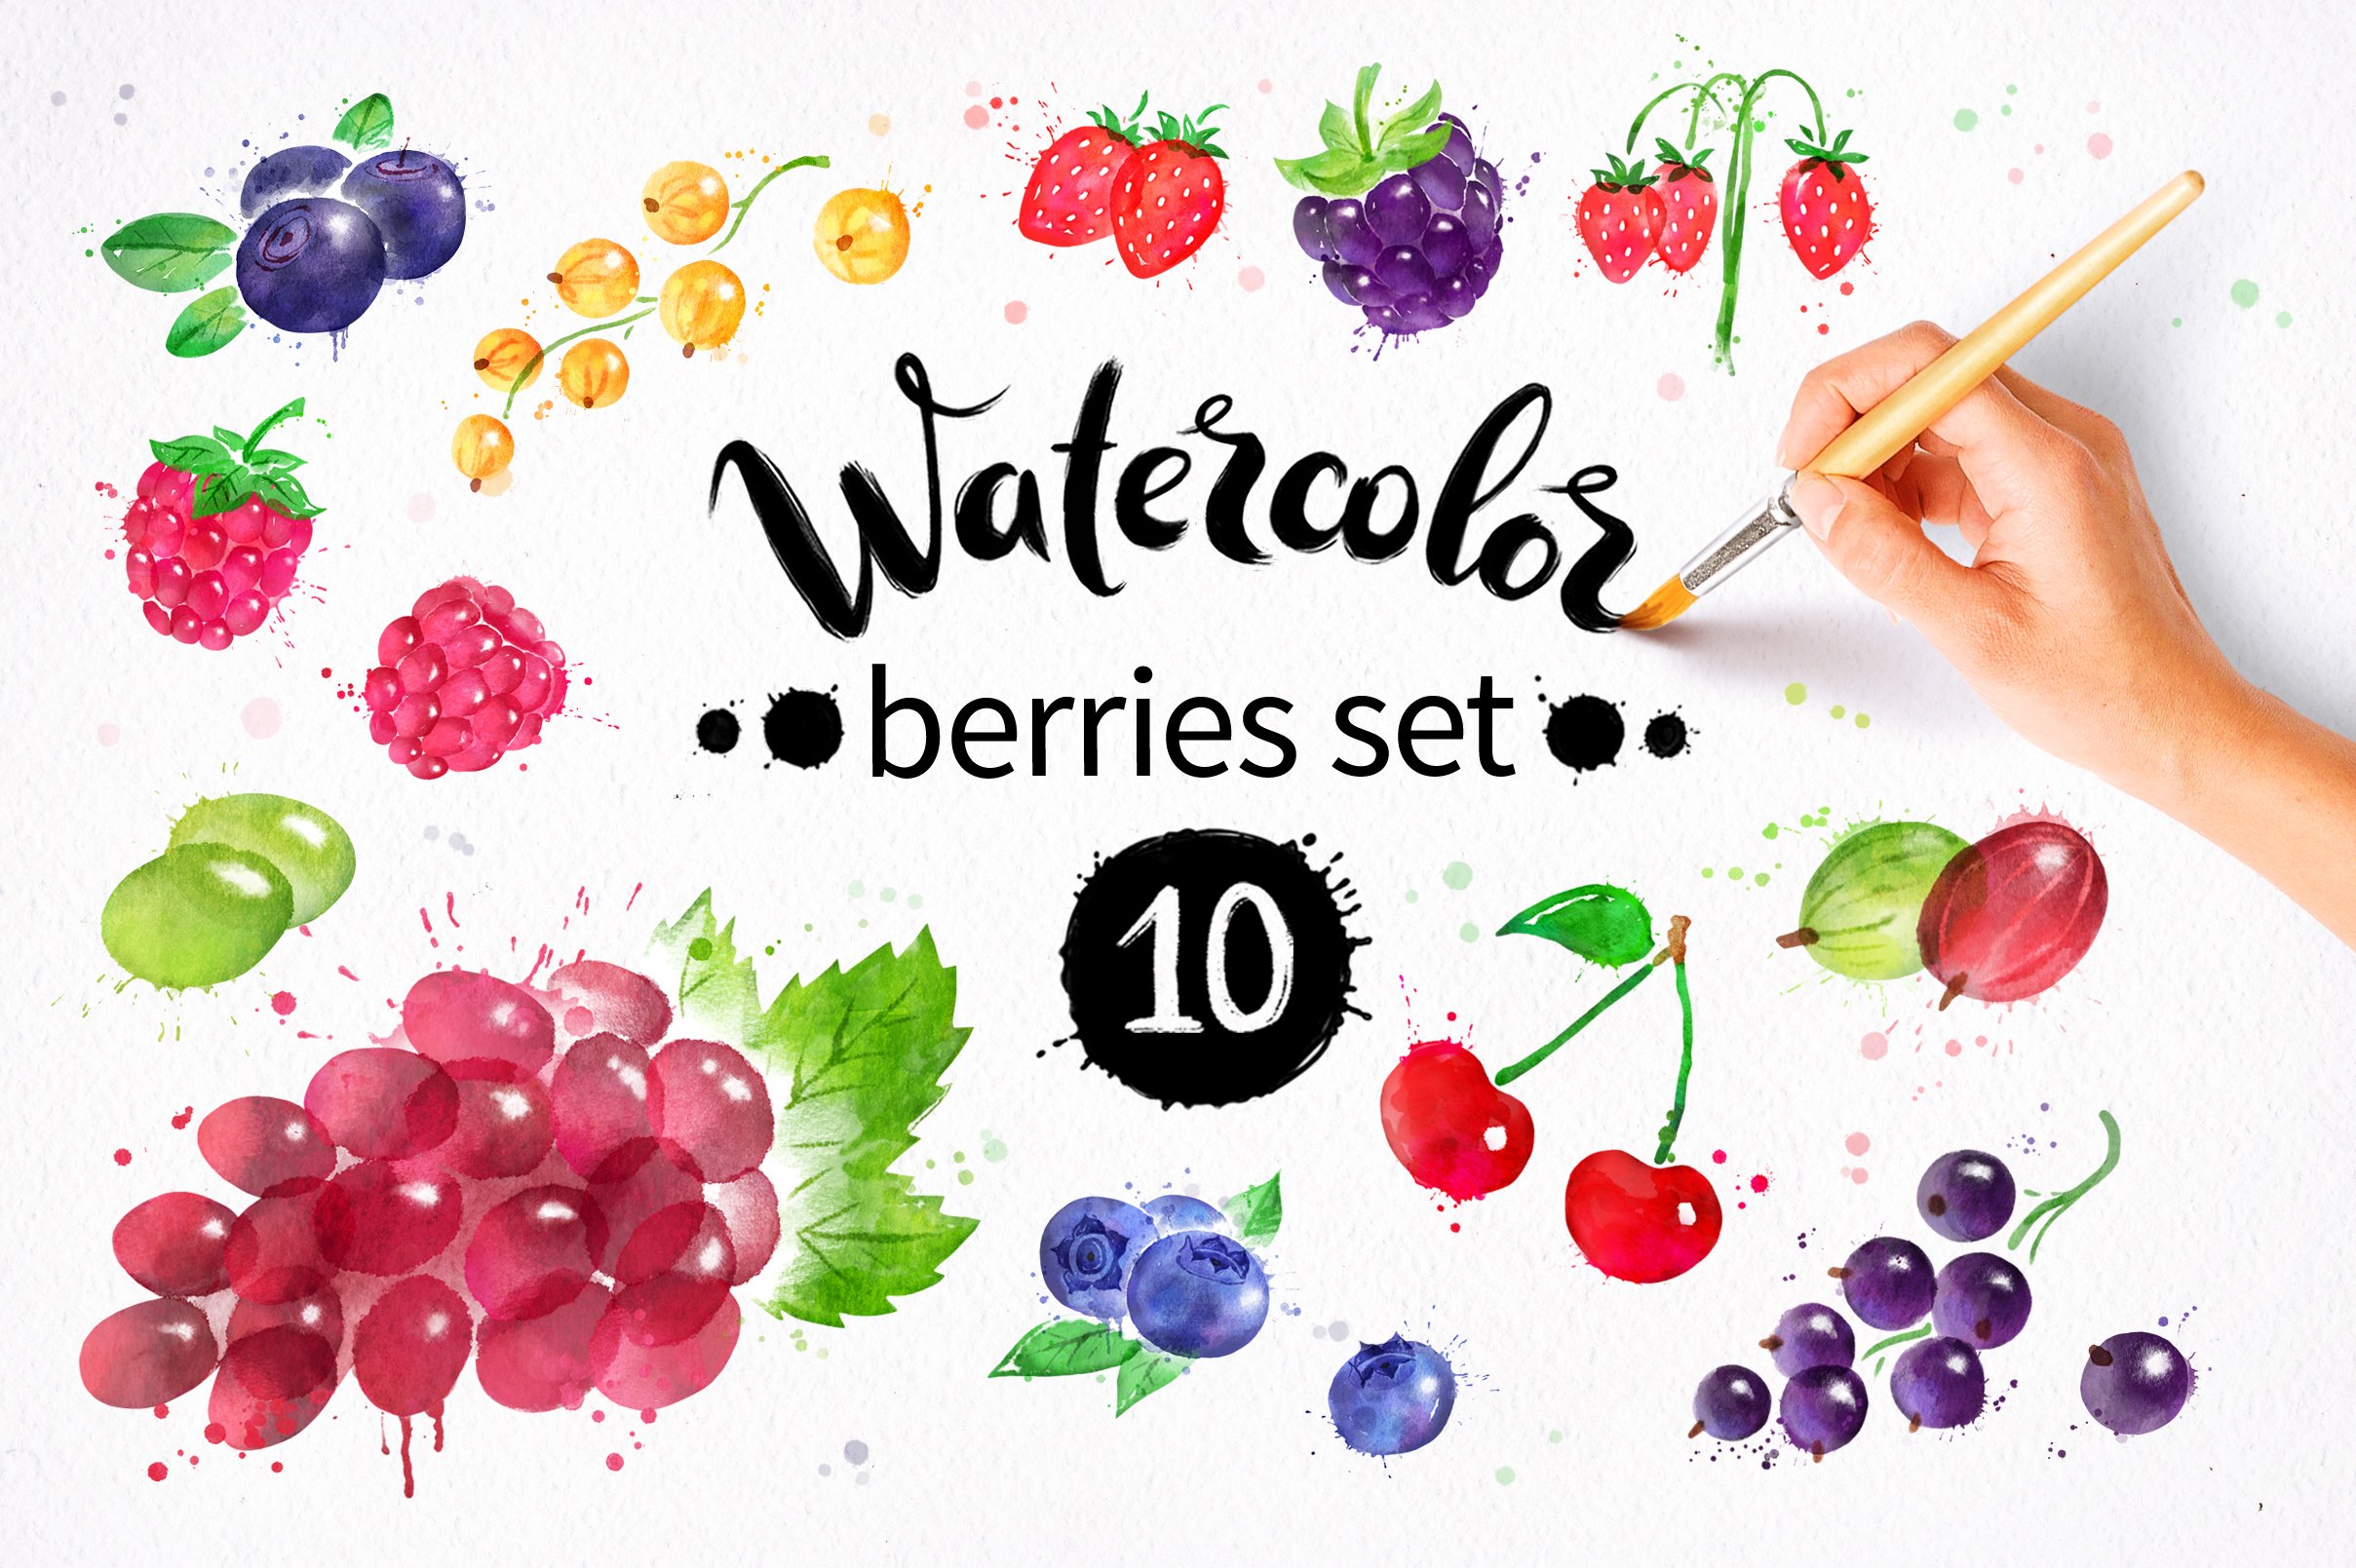 Berries Watercolor Collection cover image.